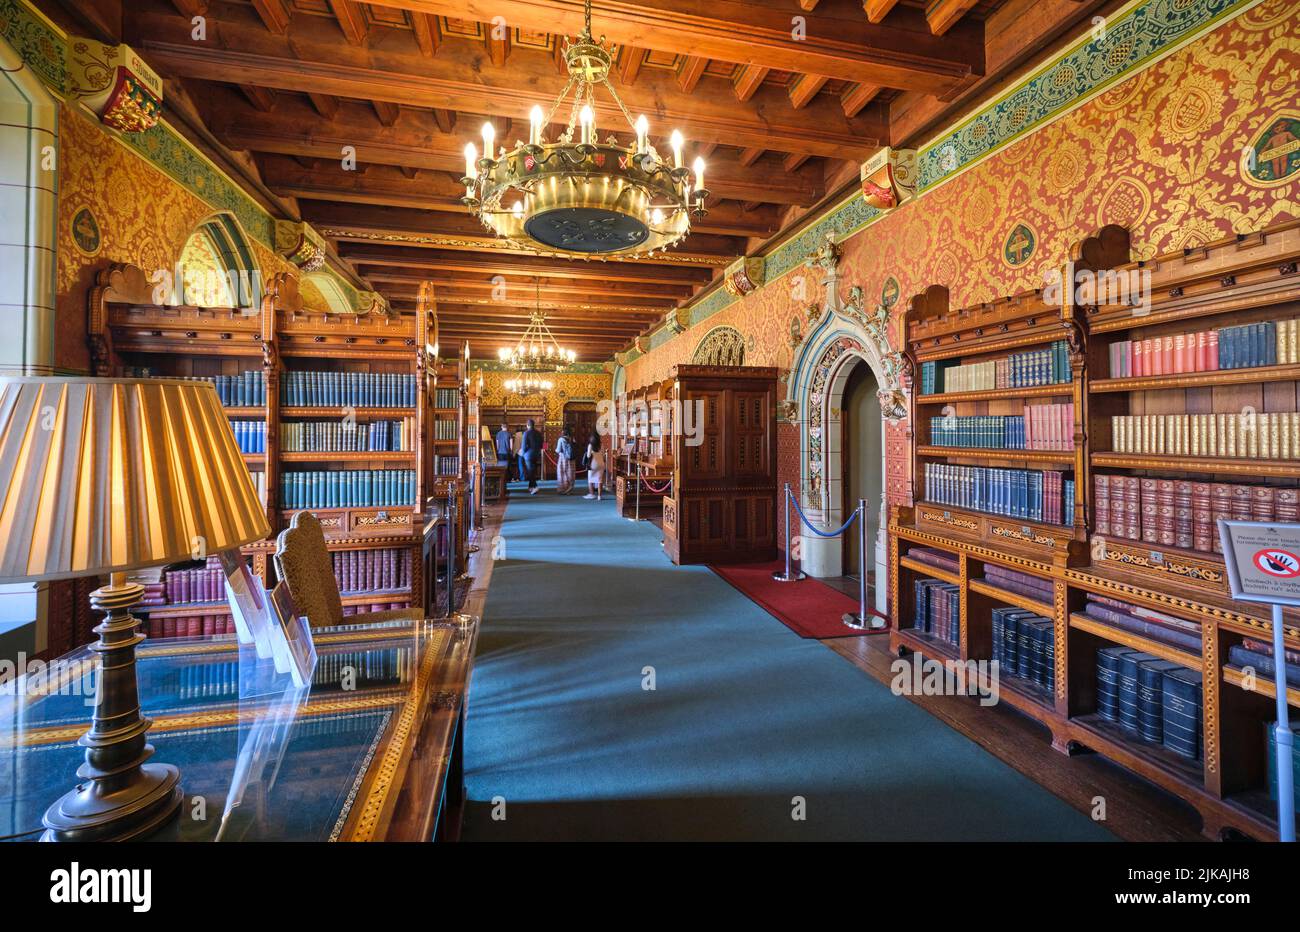 Grand chandelier and rows of books on bookslelves. In the richly decorated library at Cardiff Castle in Cardiff, Wales, United Kingdom. Stock Photo